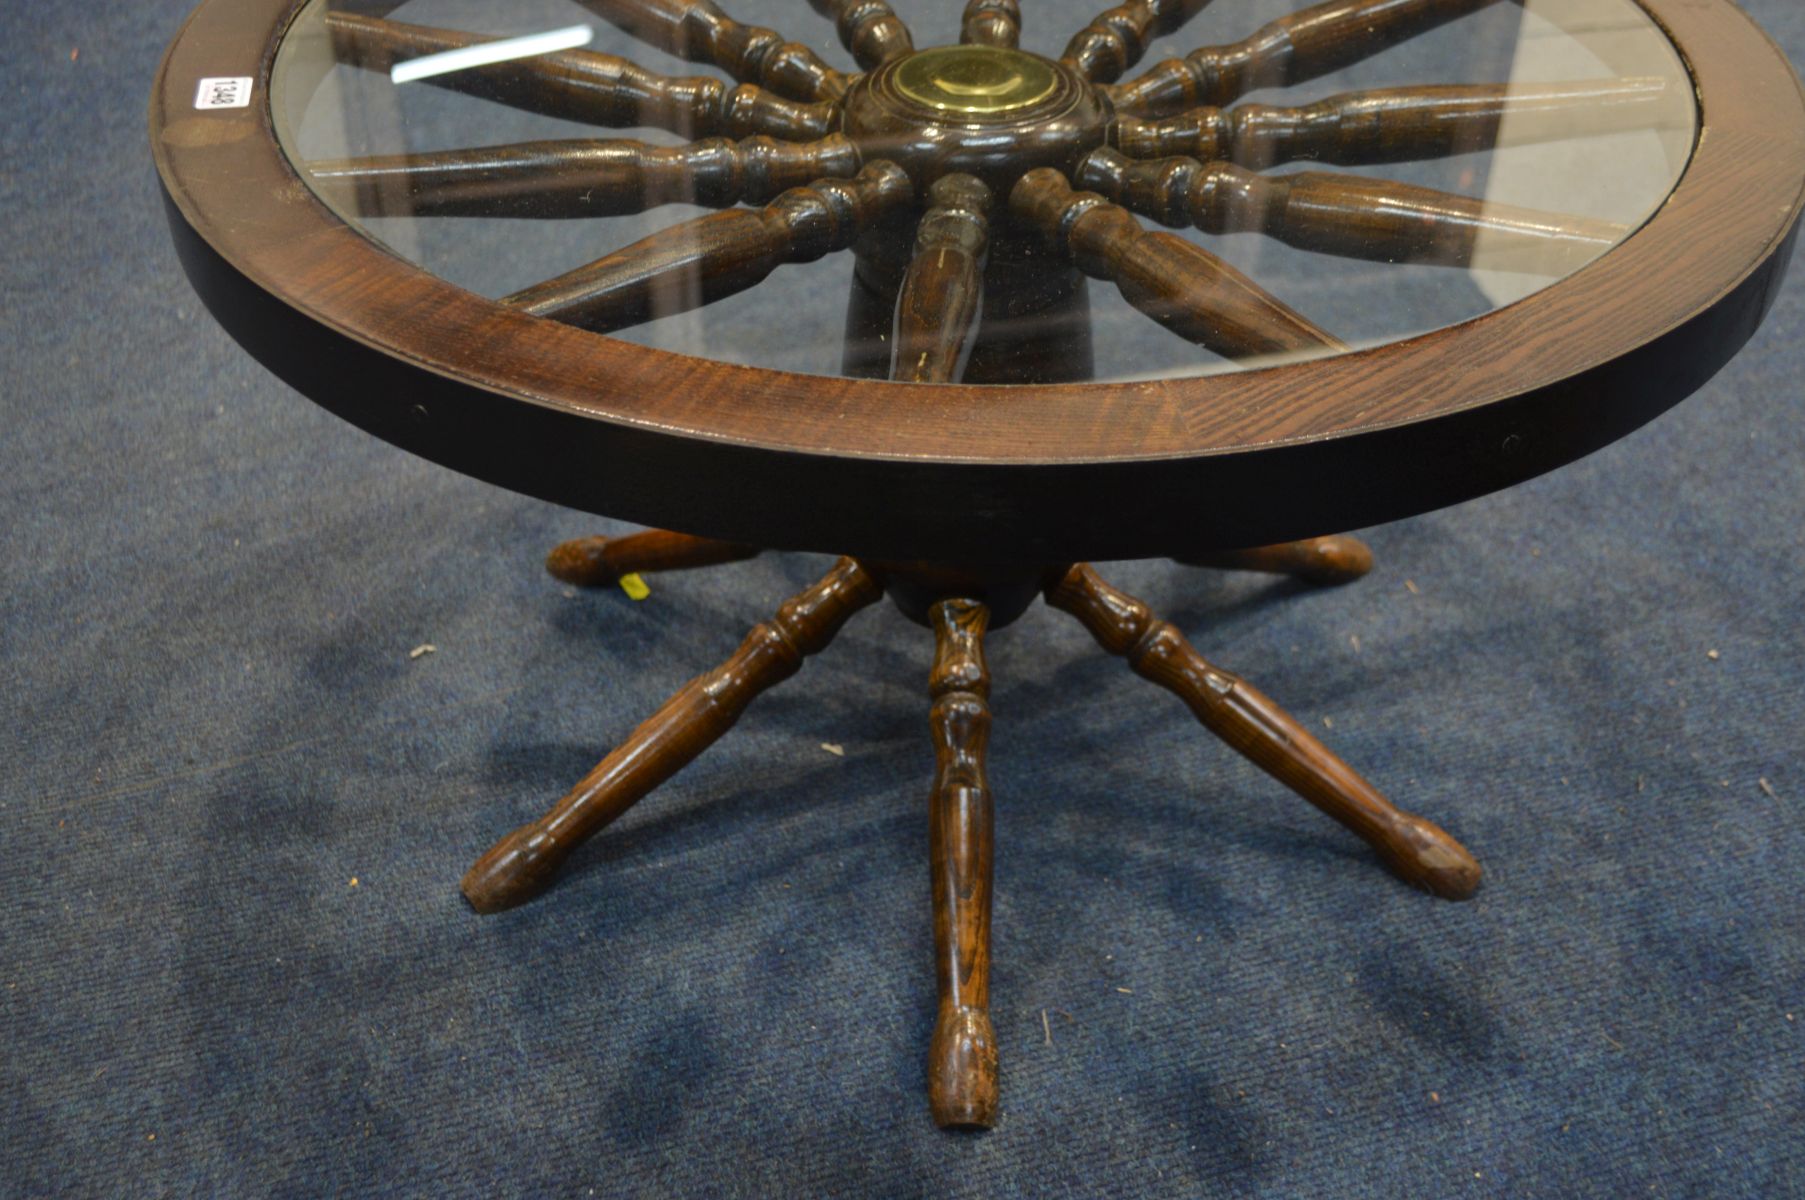 AN OAK NOVELTY SHIPS WHEEL COFFEE TABLE with a glass insert, diameter 75cm x height 42cm - Image 2 of 2